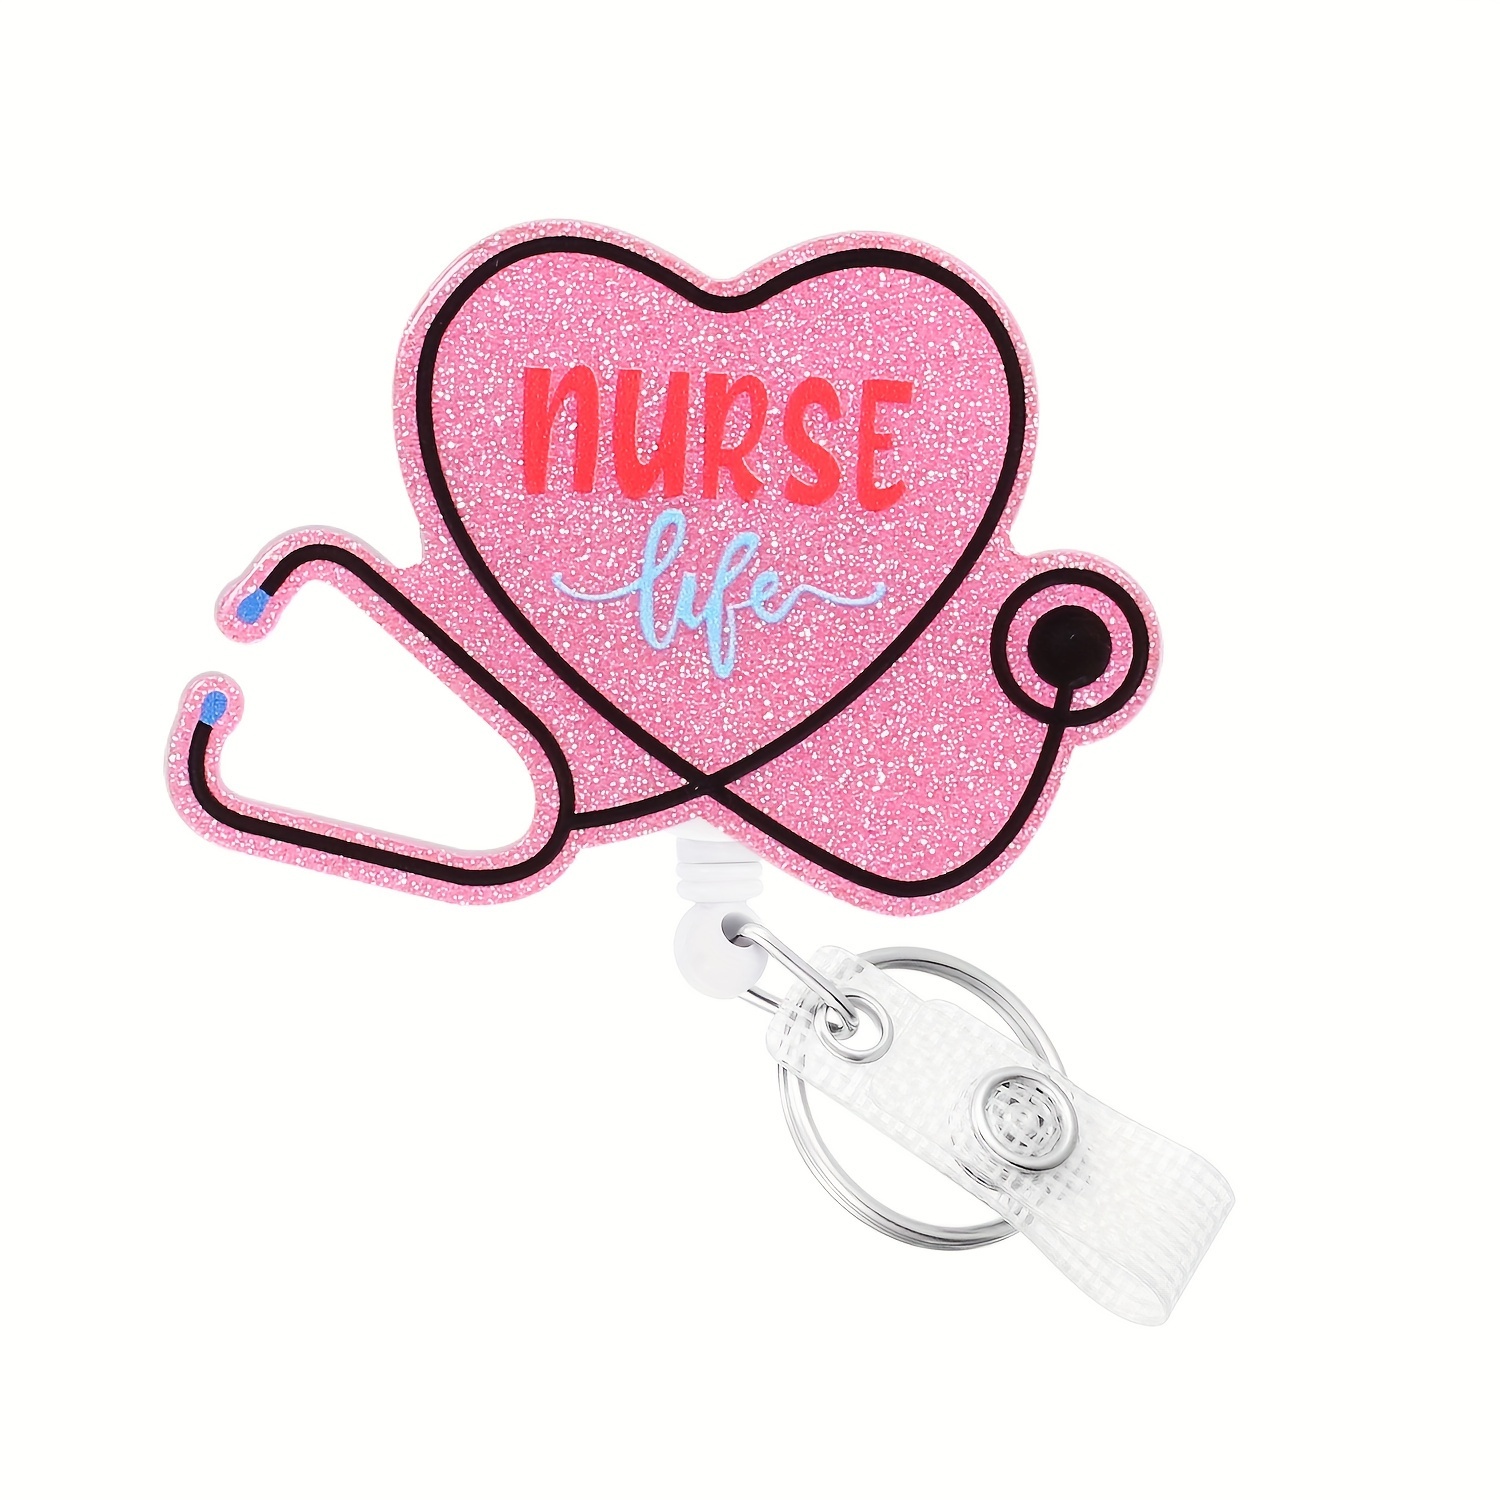 Nurse Badge 2Pcs Nurse Badge Card Nurse Badge Buddy with Retractable Badge  Reel Badge Clip Glitter Pink Horizontal Badge Holder Badge Accessories for